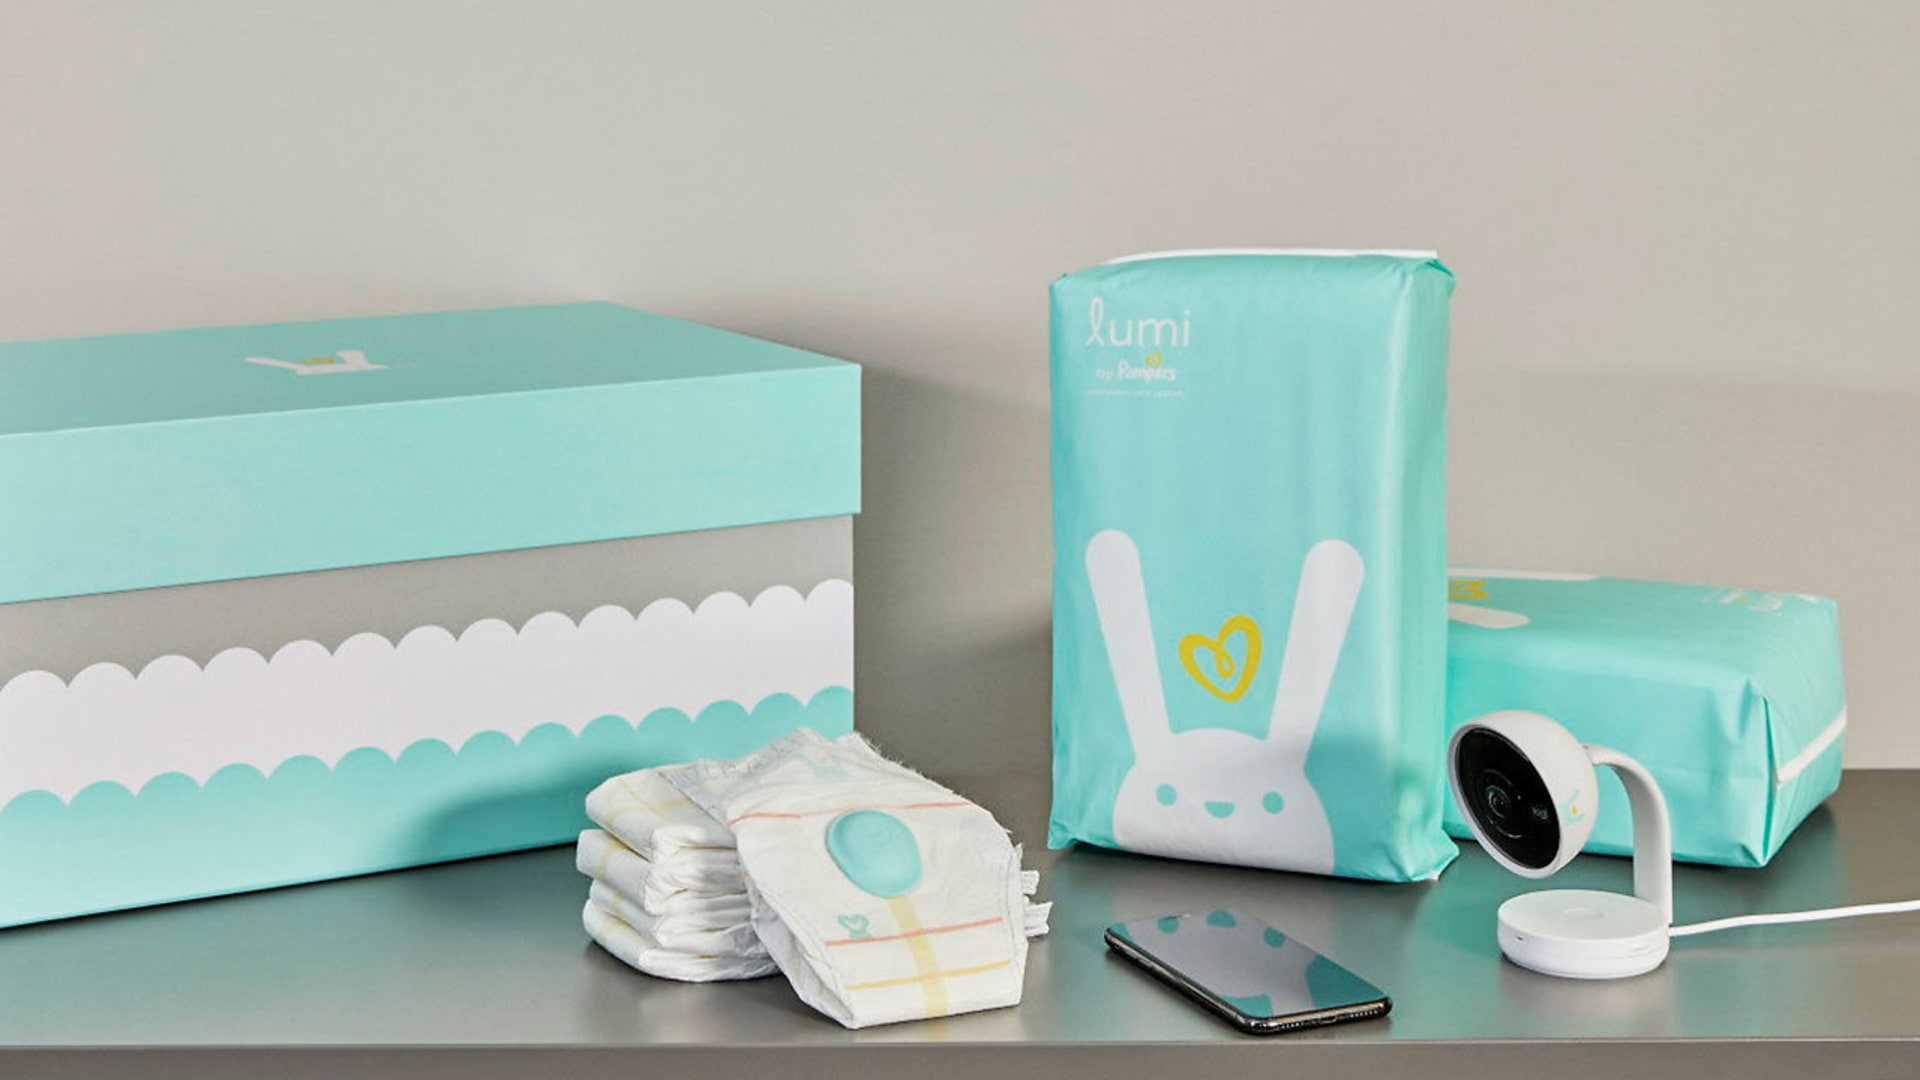 Pampers smart diapers let you track your baby’s pee with technology